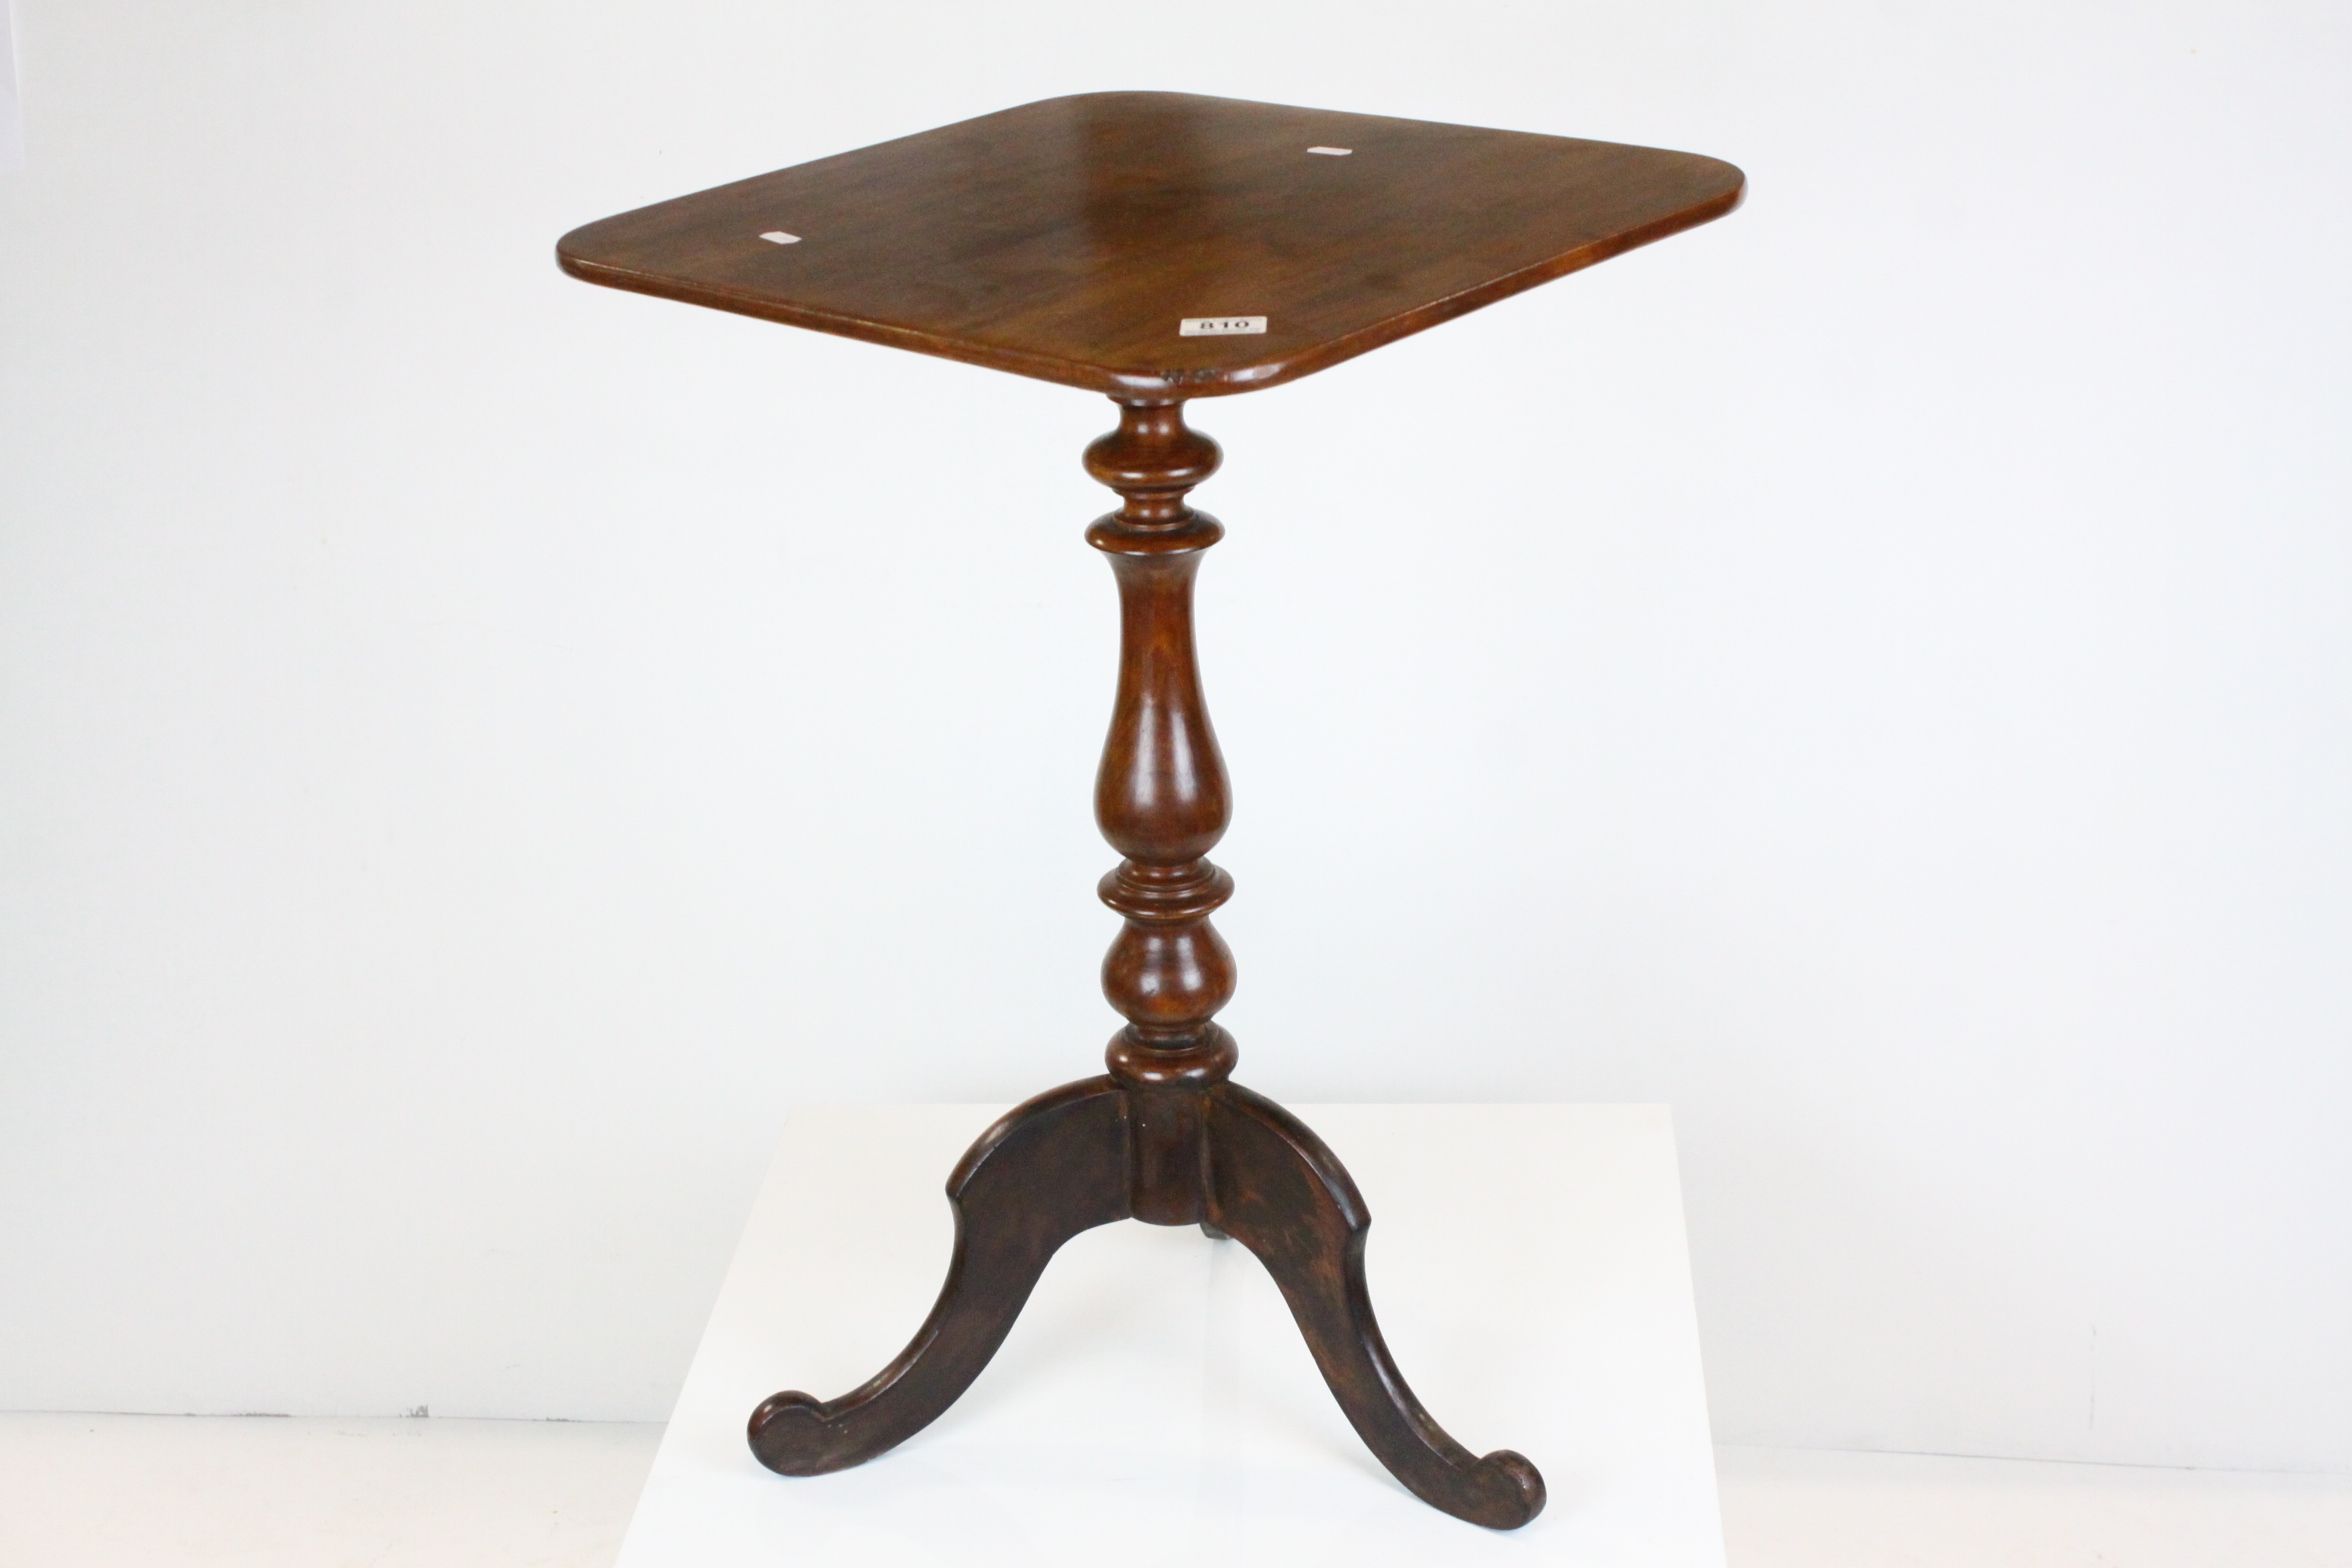 19th century Mahogany Pedestal Lamp Table with square top, 47cms wide x 70cms high